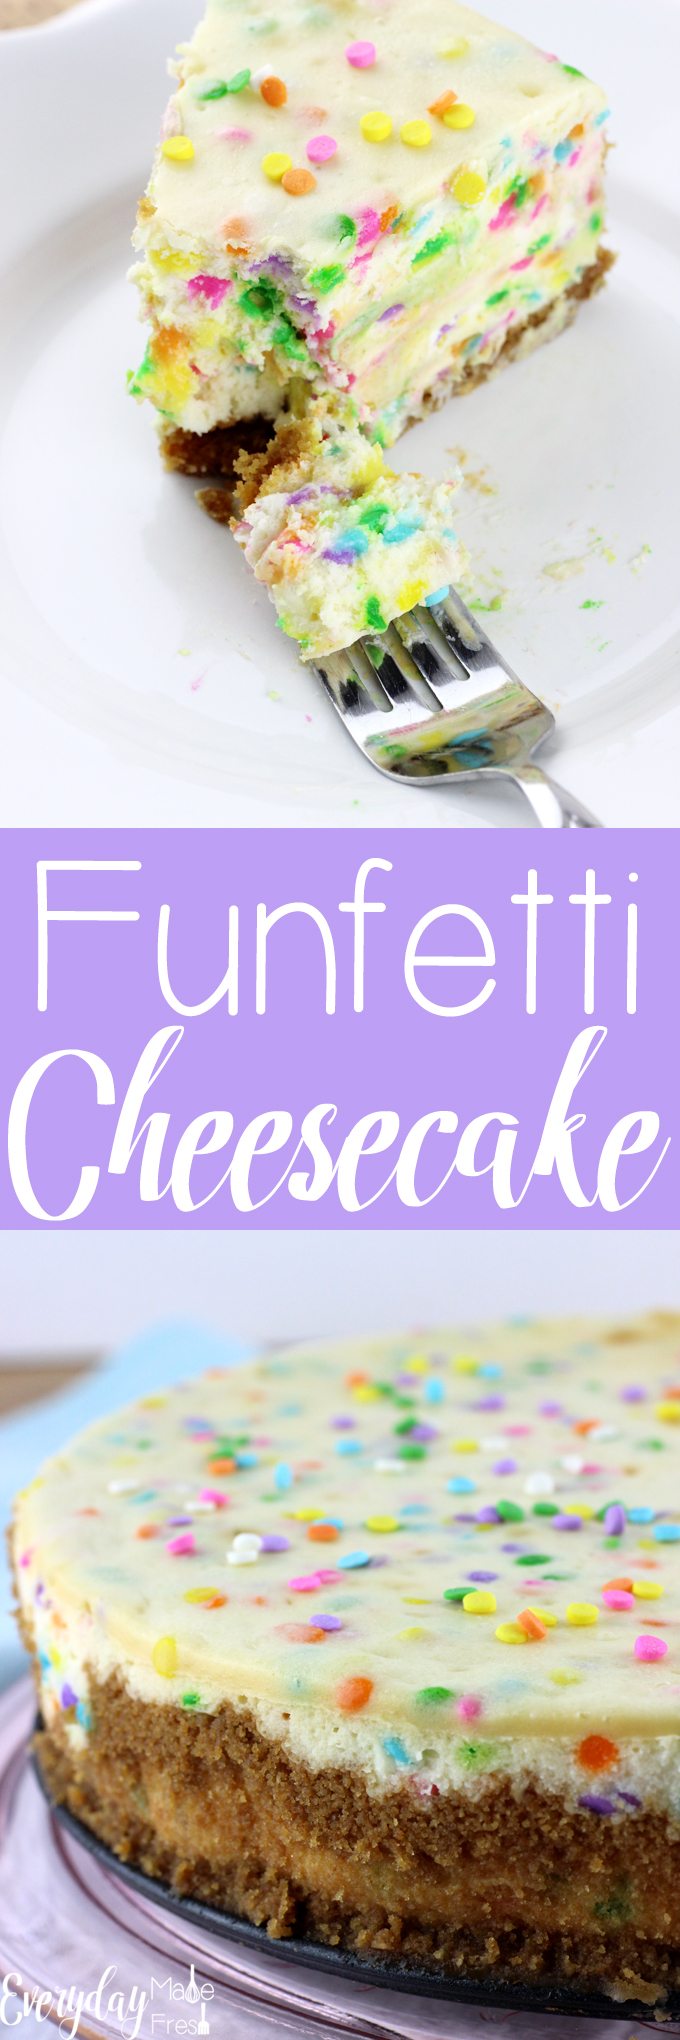 Nothing beats a perfectly baked cheesecake...until this Funfetti Cheesecake hits the table! | EverydayMadeFresh.com